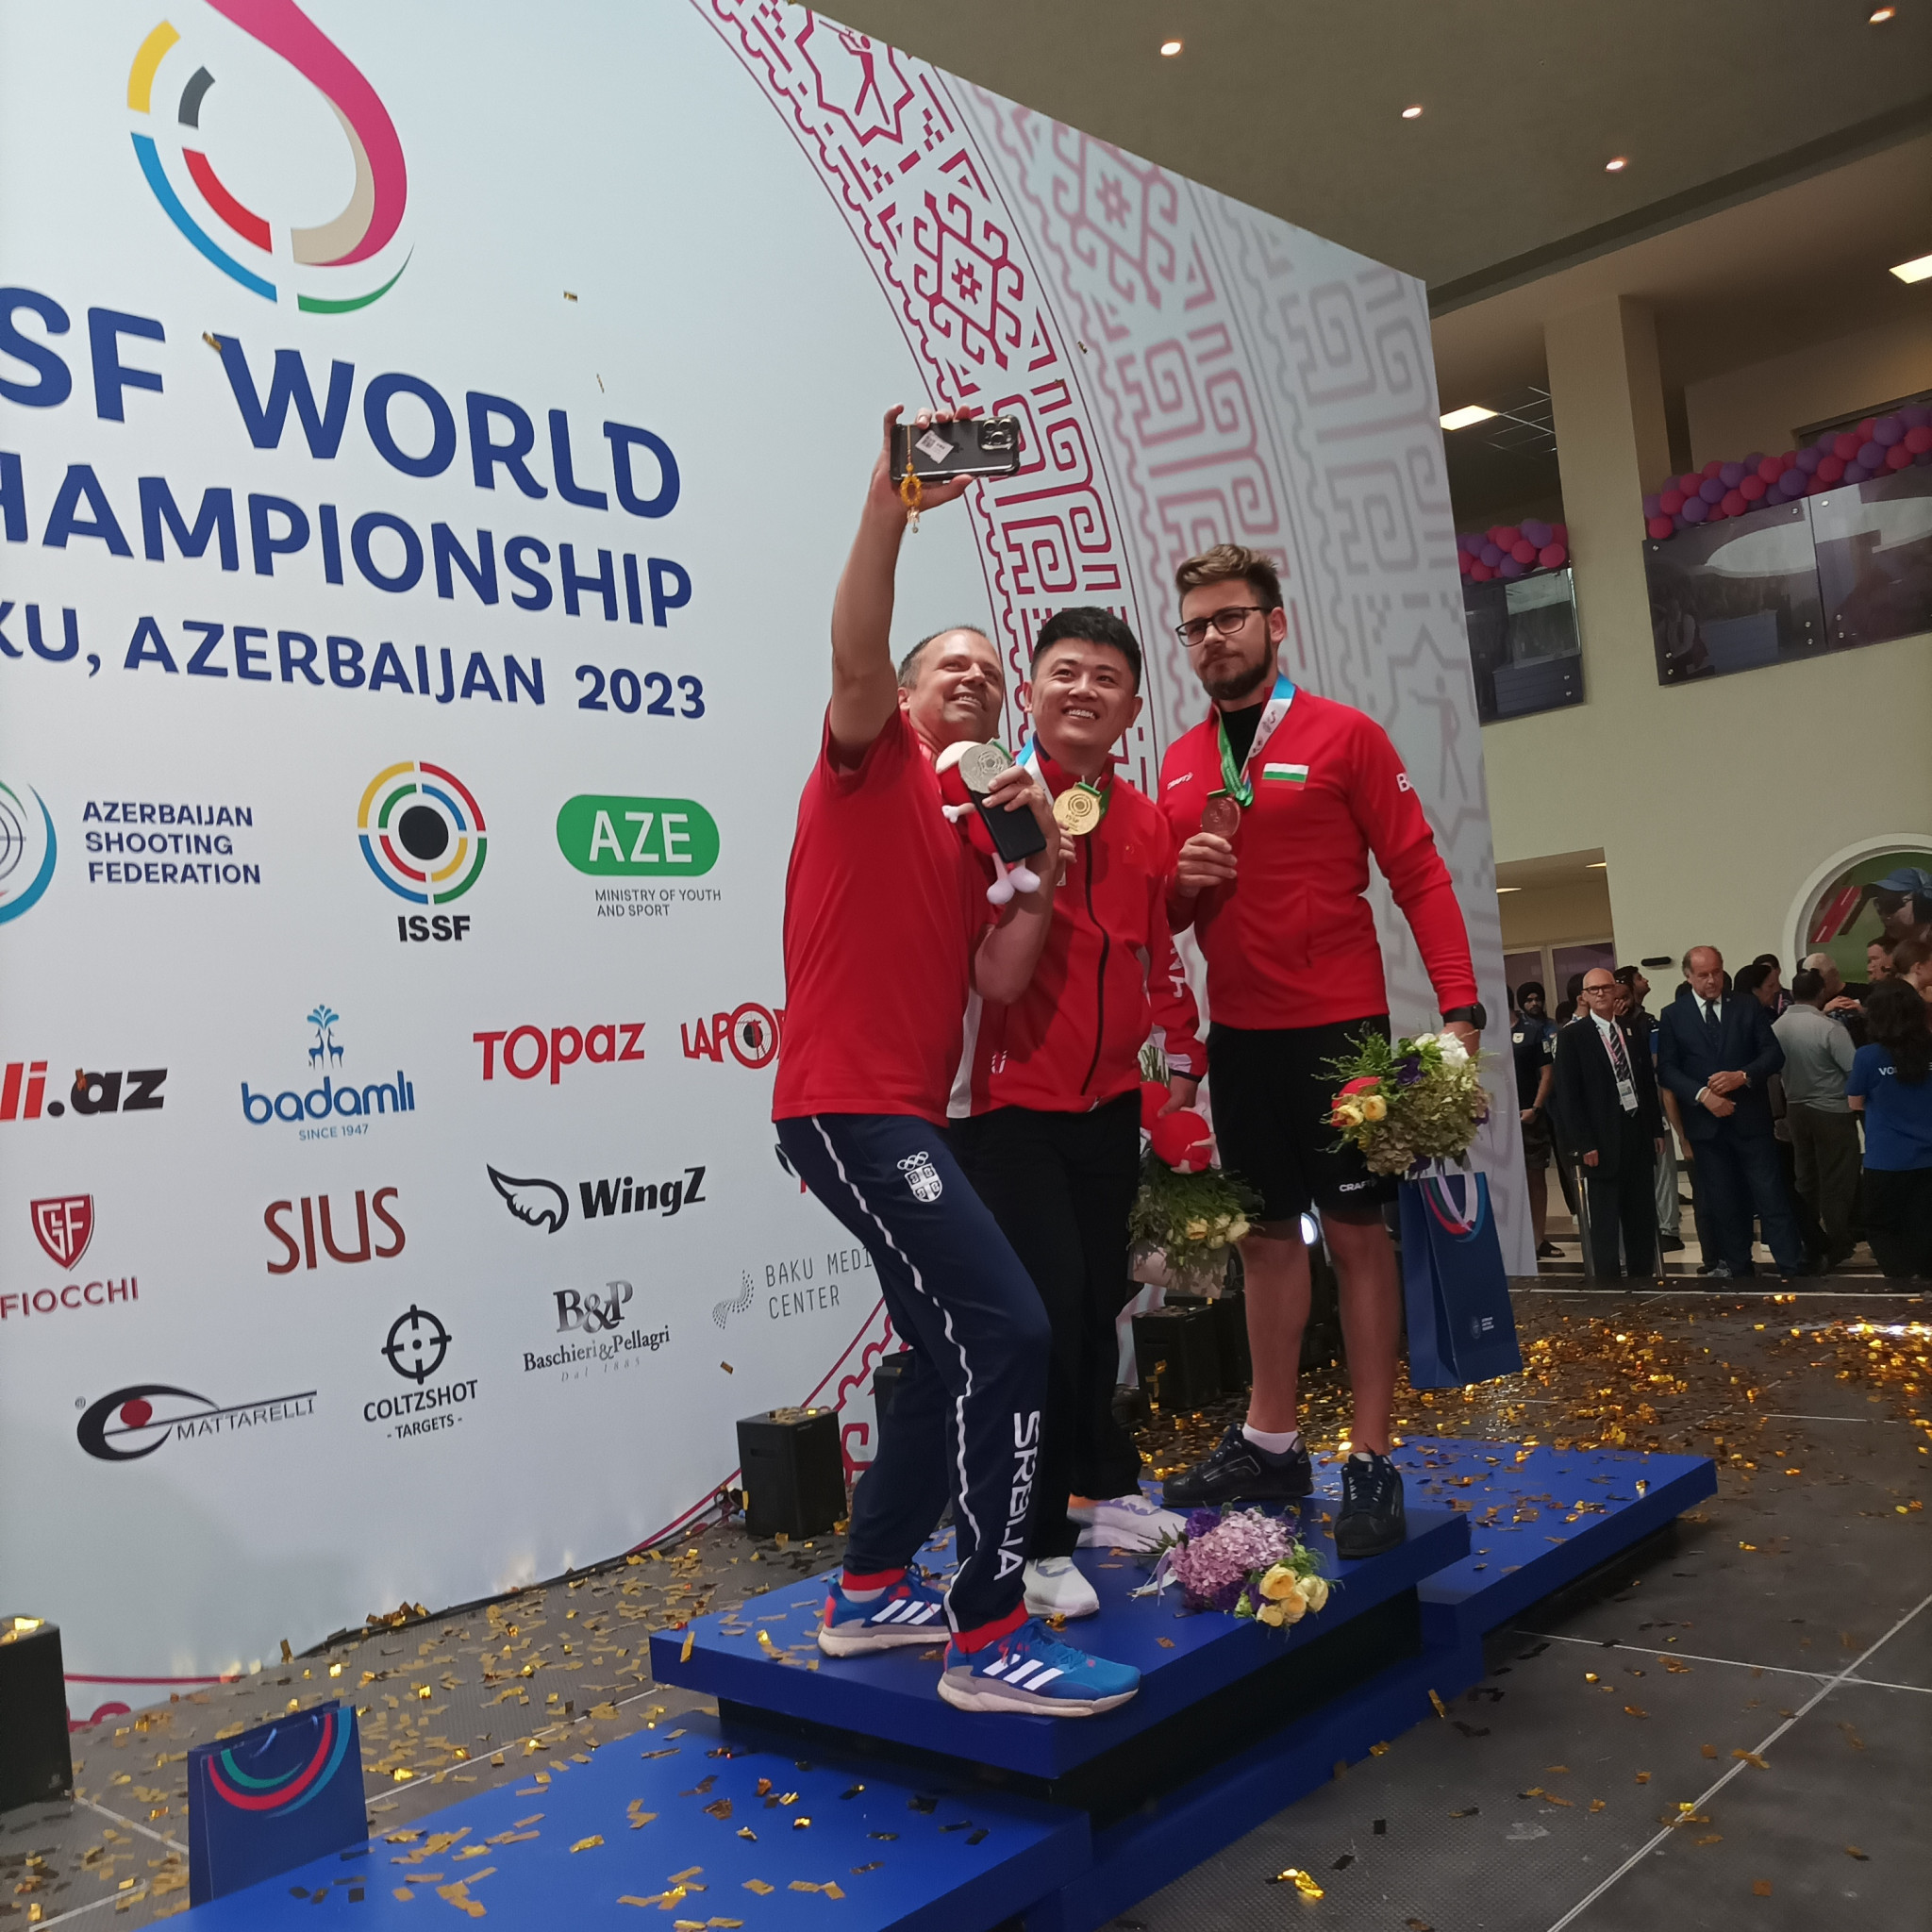 The first medal ceremony selfie of the ISSF World Shooting Championships ©ITG